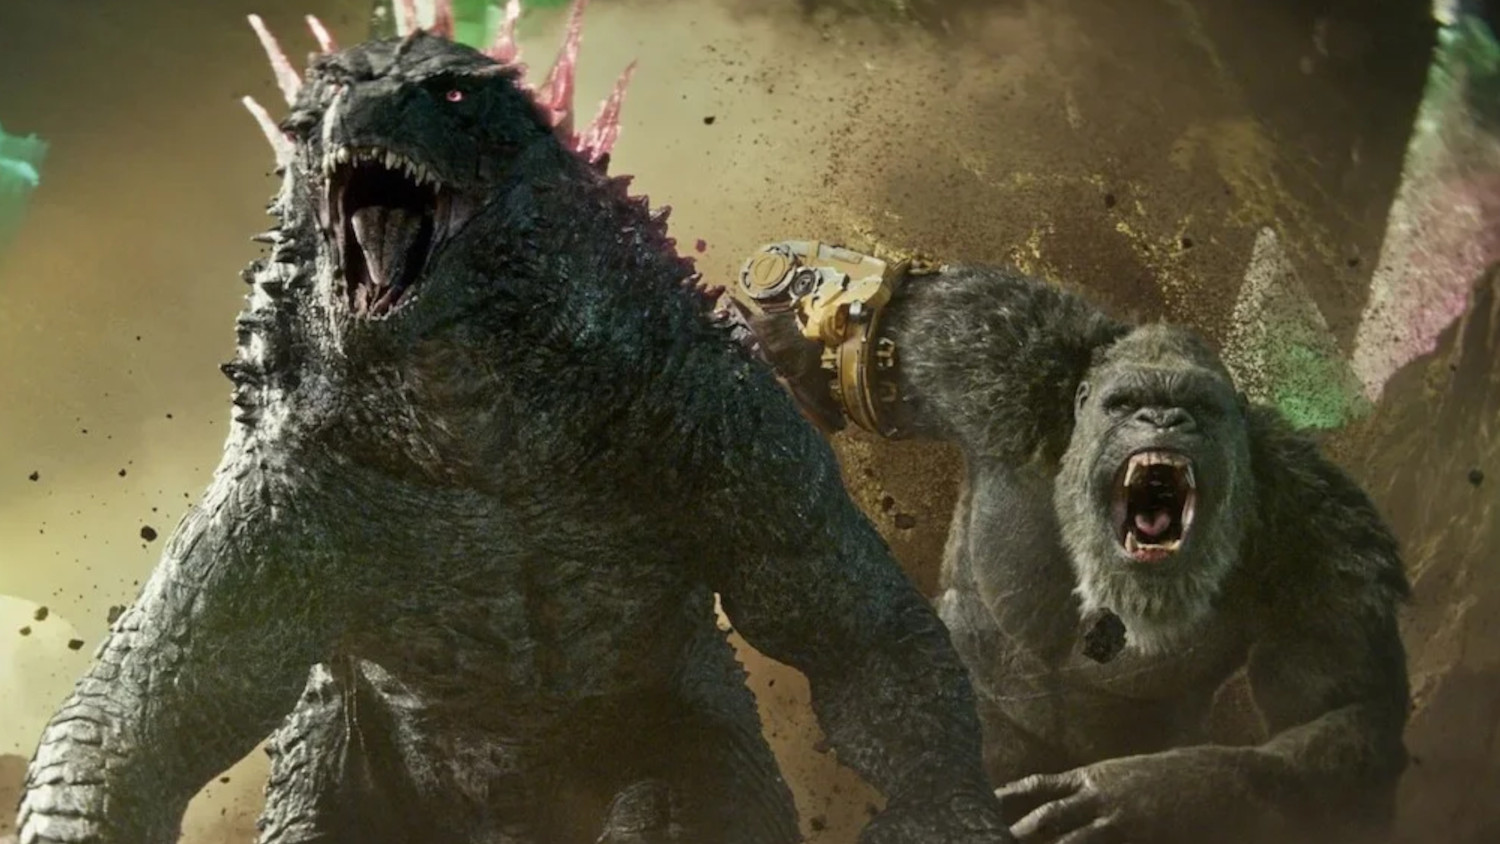 ‘Godzilla x Kong’ Sequel Gets New Director With Grant Sputore